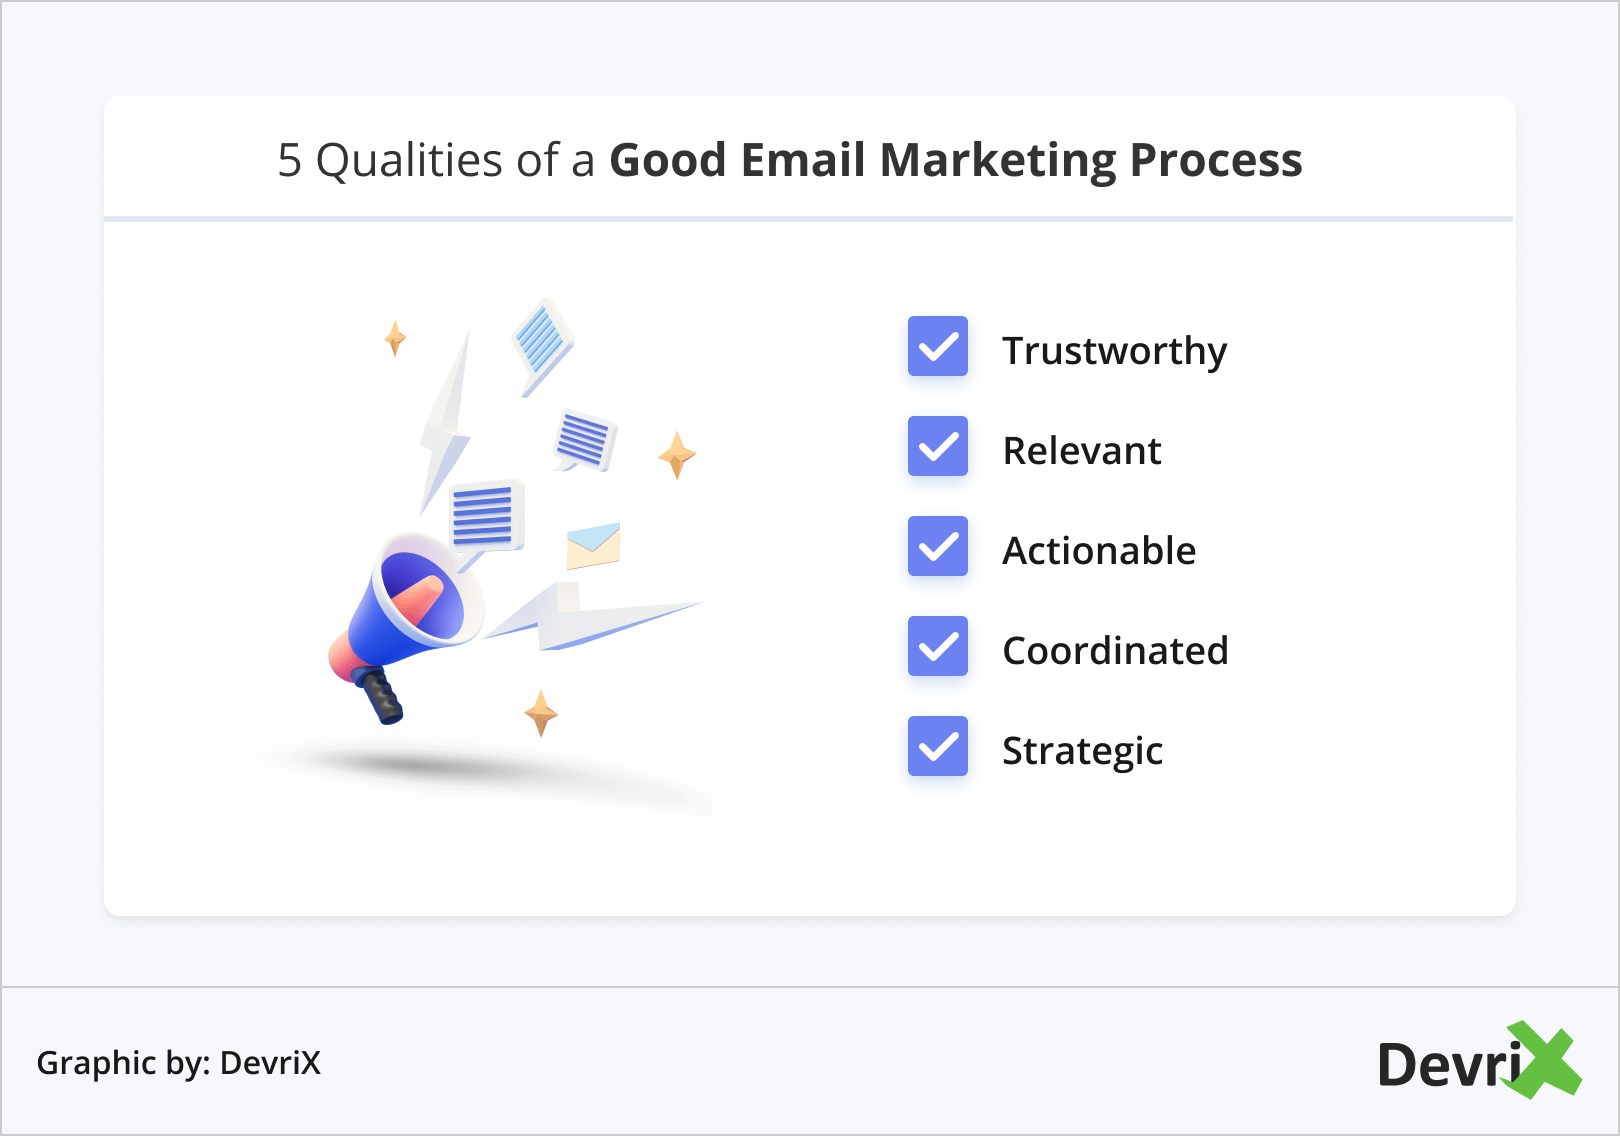 5 Qualities of a Good Email Marketing Process